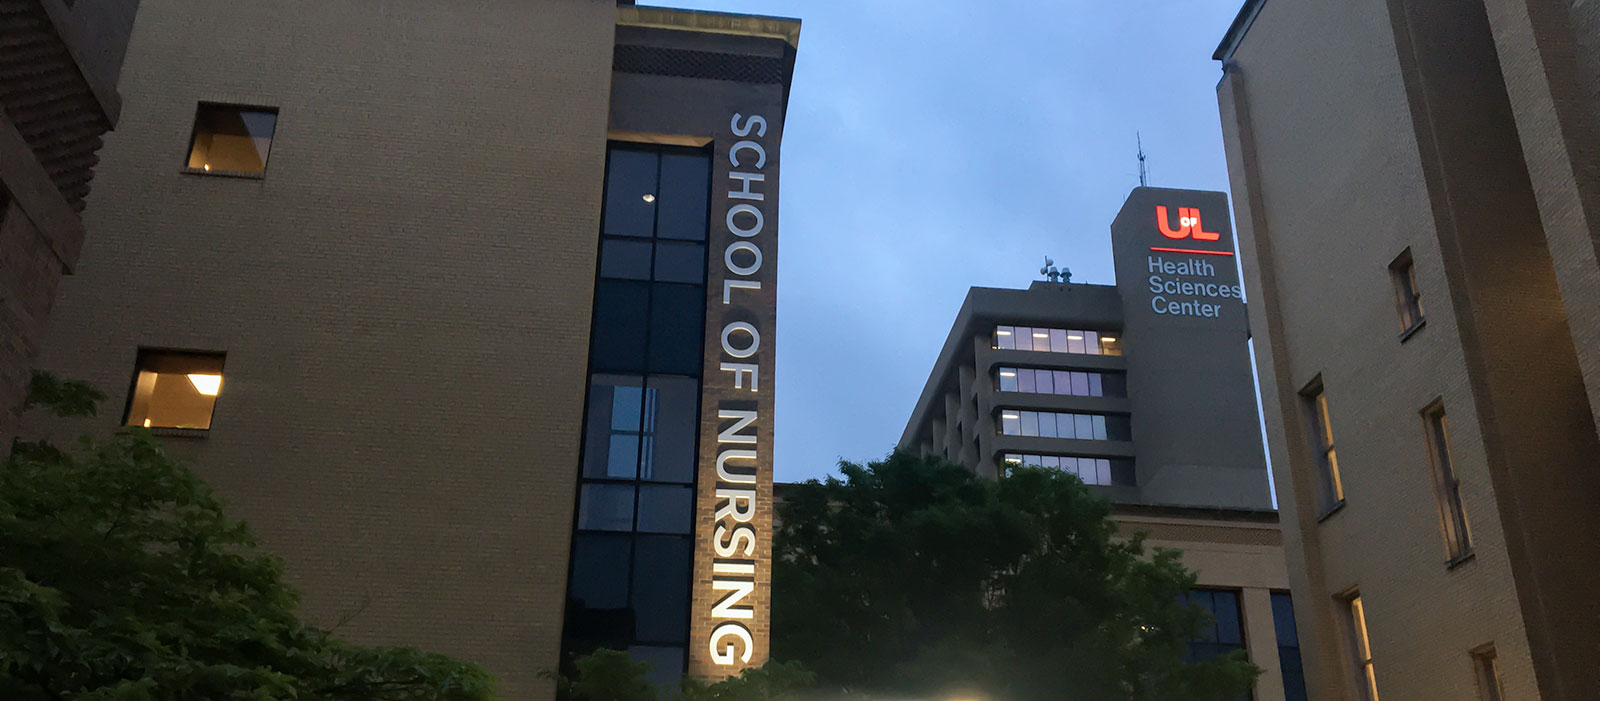 Early morning photo of the School of Nursing entrance with the UofL Health Science Campus Instructional Building in the background.